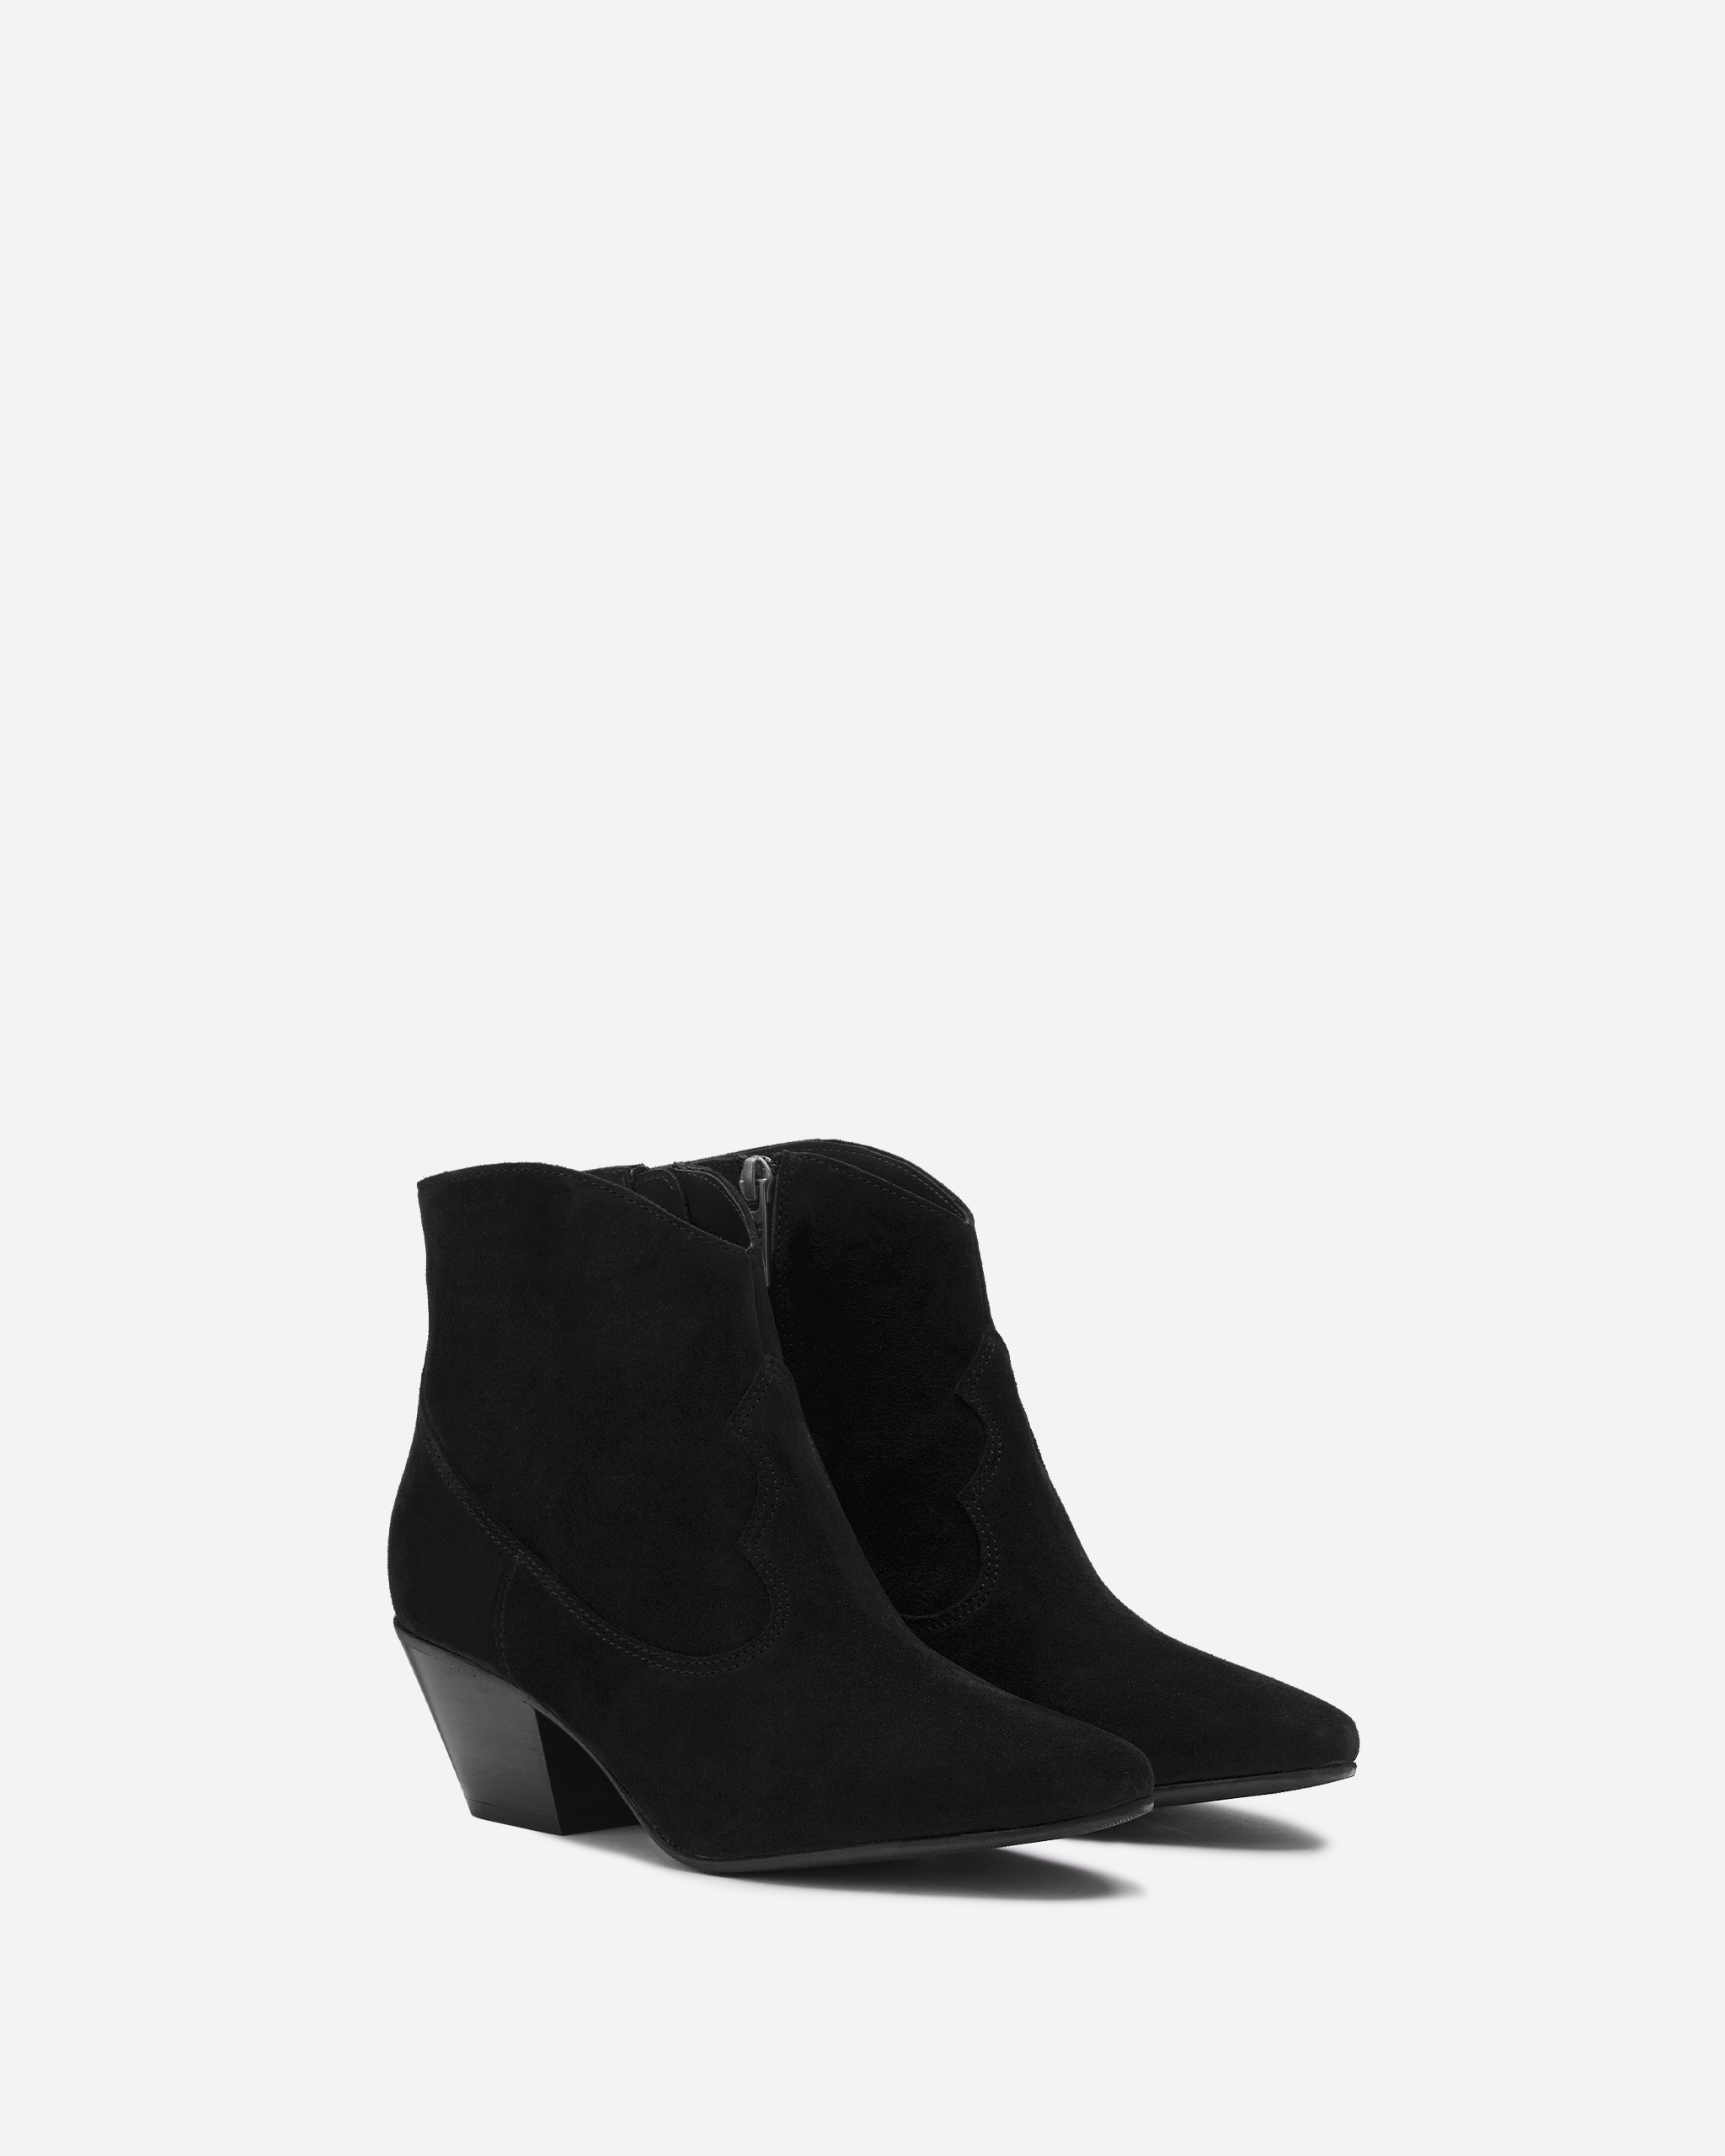 cowboy western style black suede heeled ankle boot